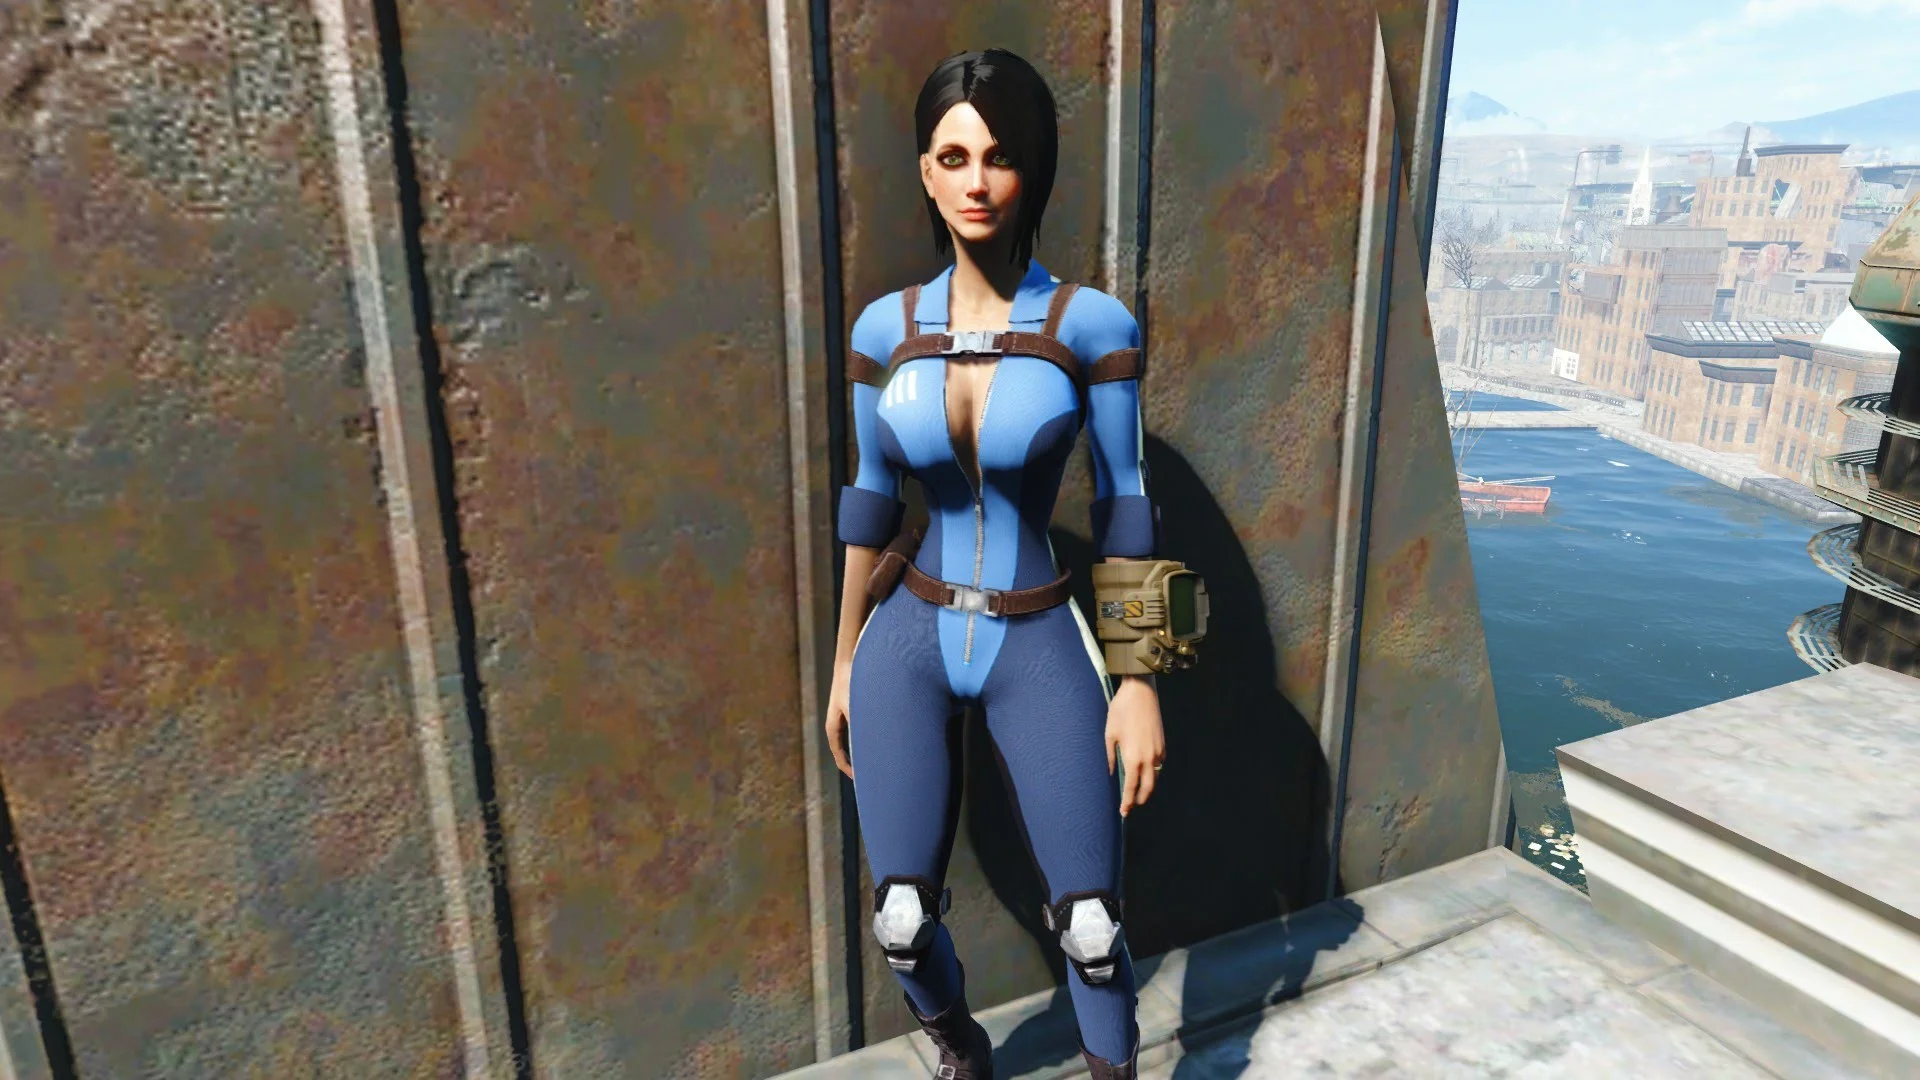 Fallout 4: Mod Review #8 "Slooty Vault Suit" (Xbox One Mods)